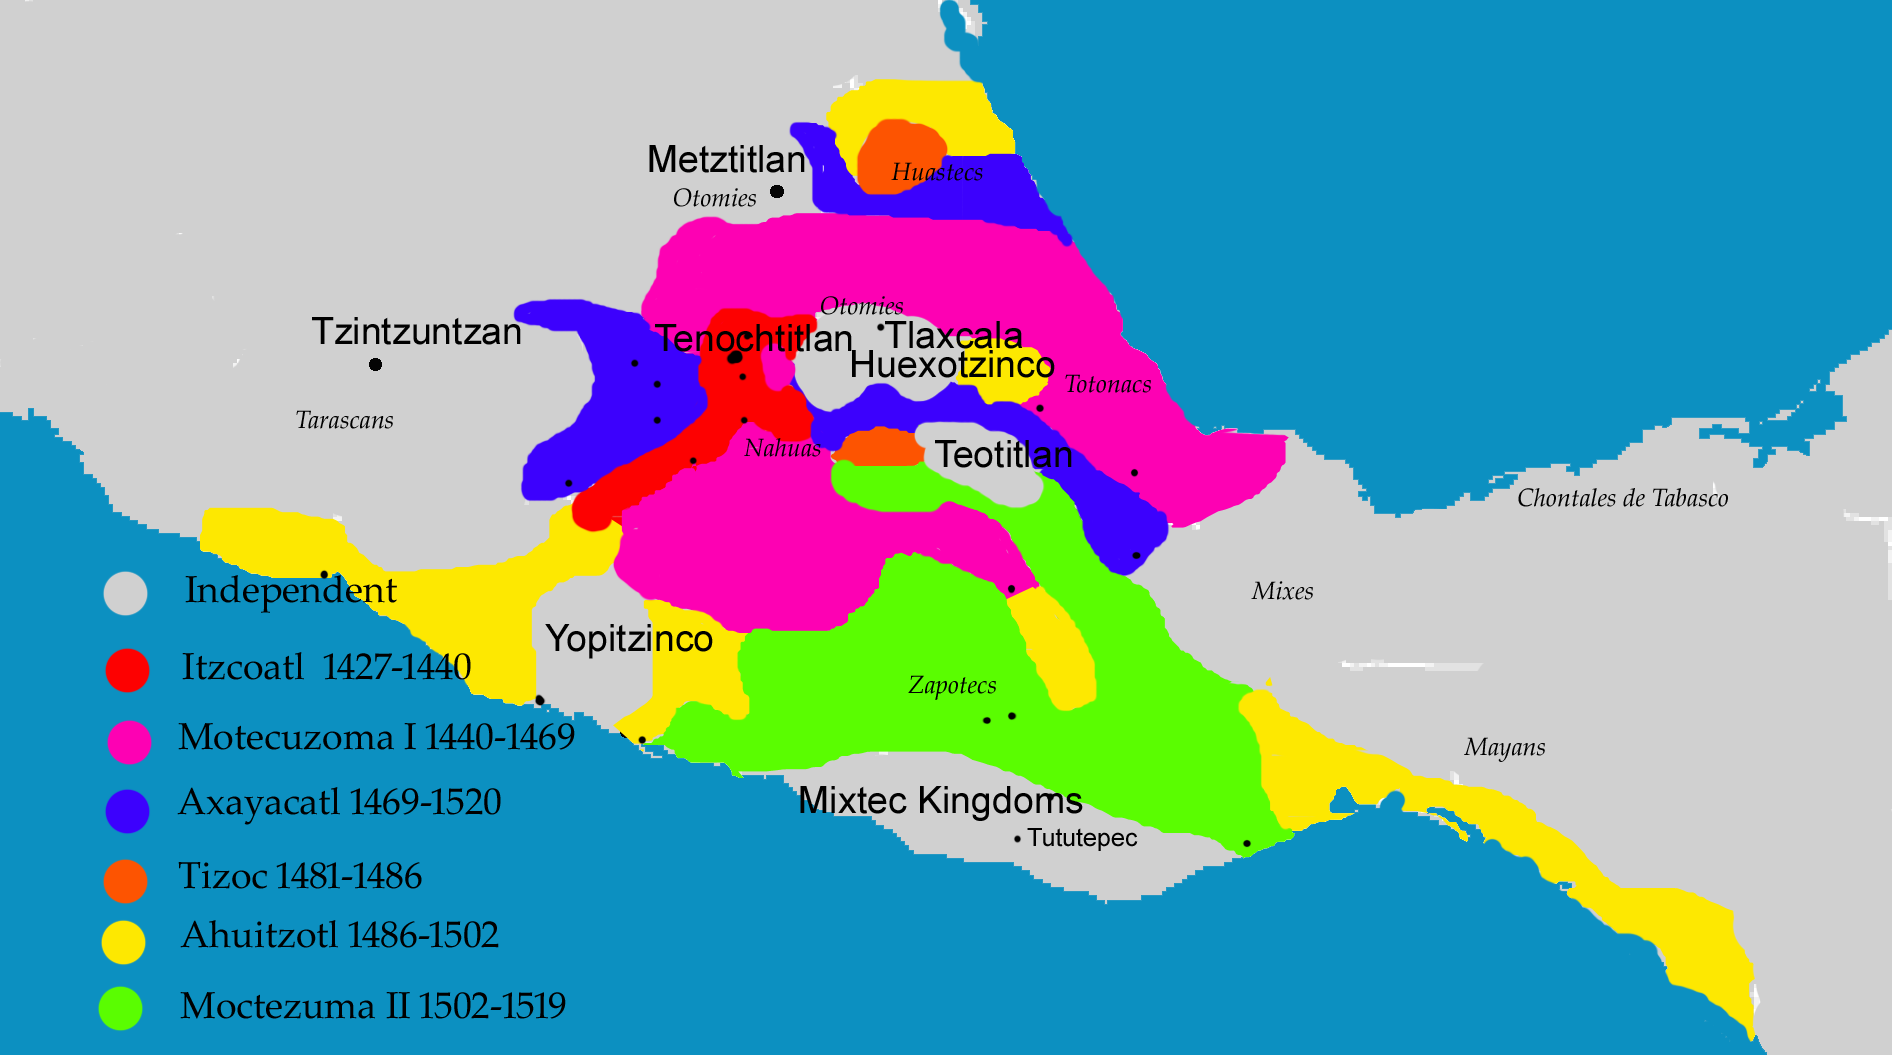 tlacaelel, the man who gave the aztec empire its